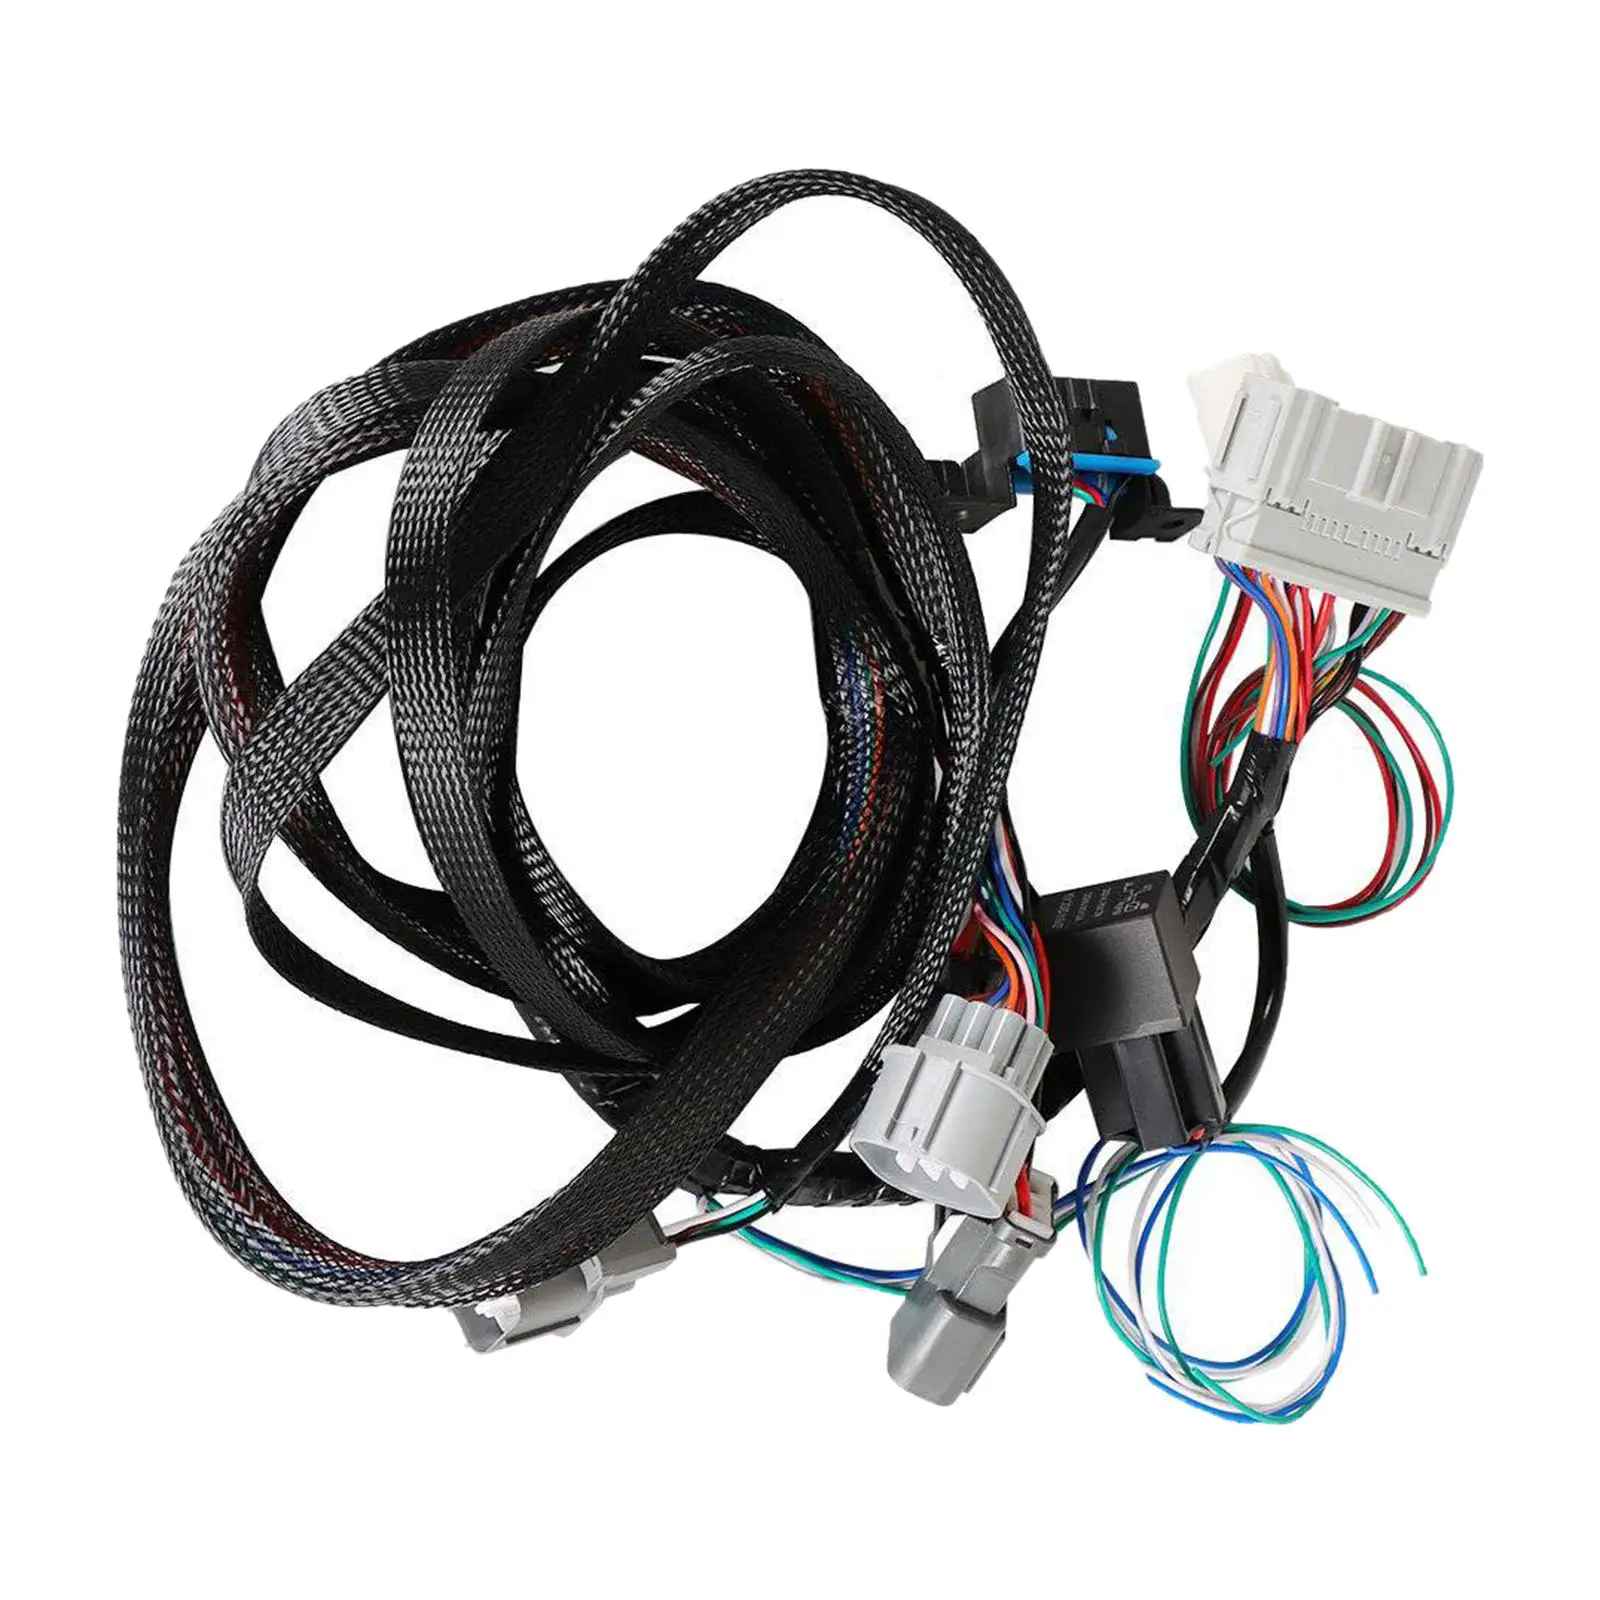 Durable Conversion Wiring Harness Modification Replacement Parts Accessory Auto for Civic Del Sol with K Swap 1993-1997